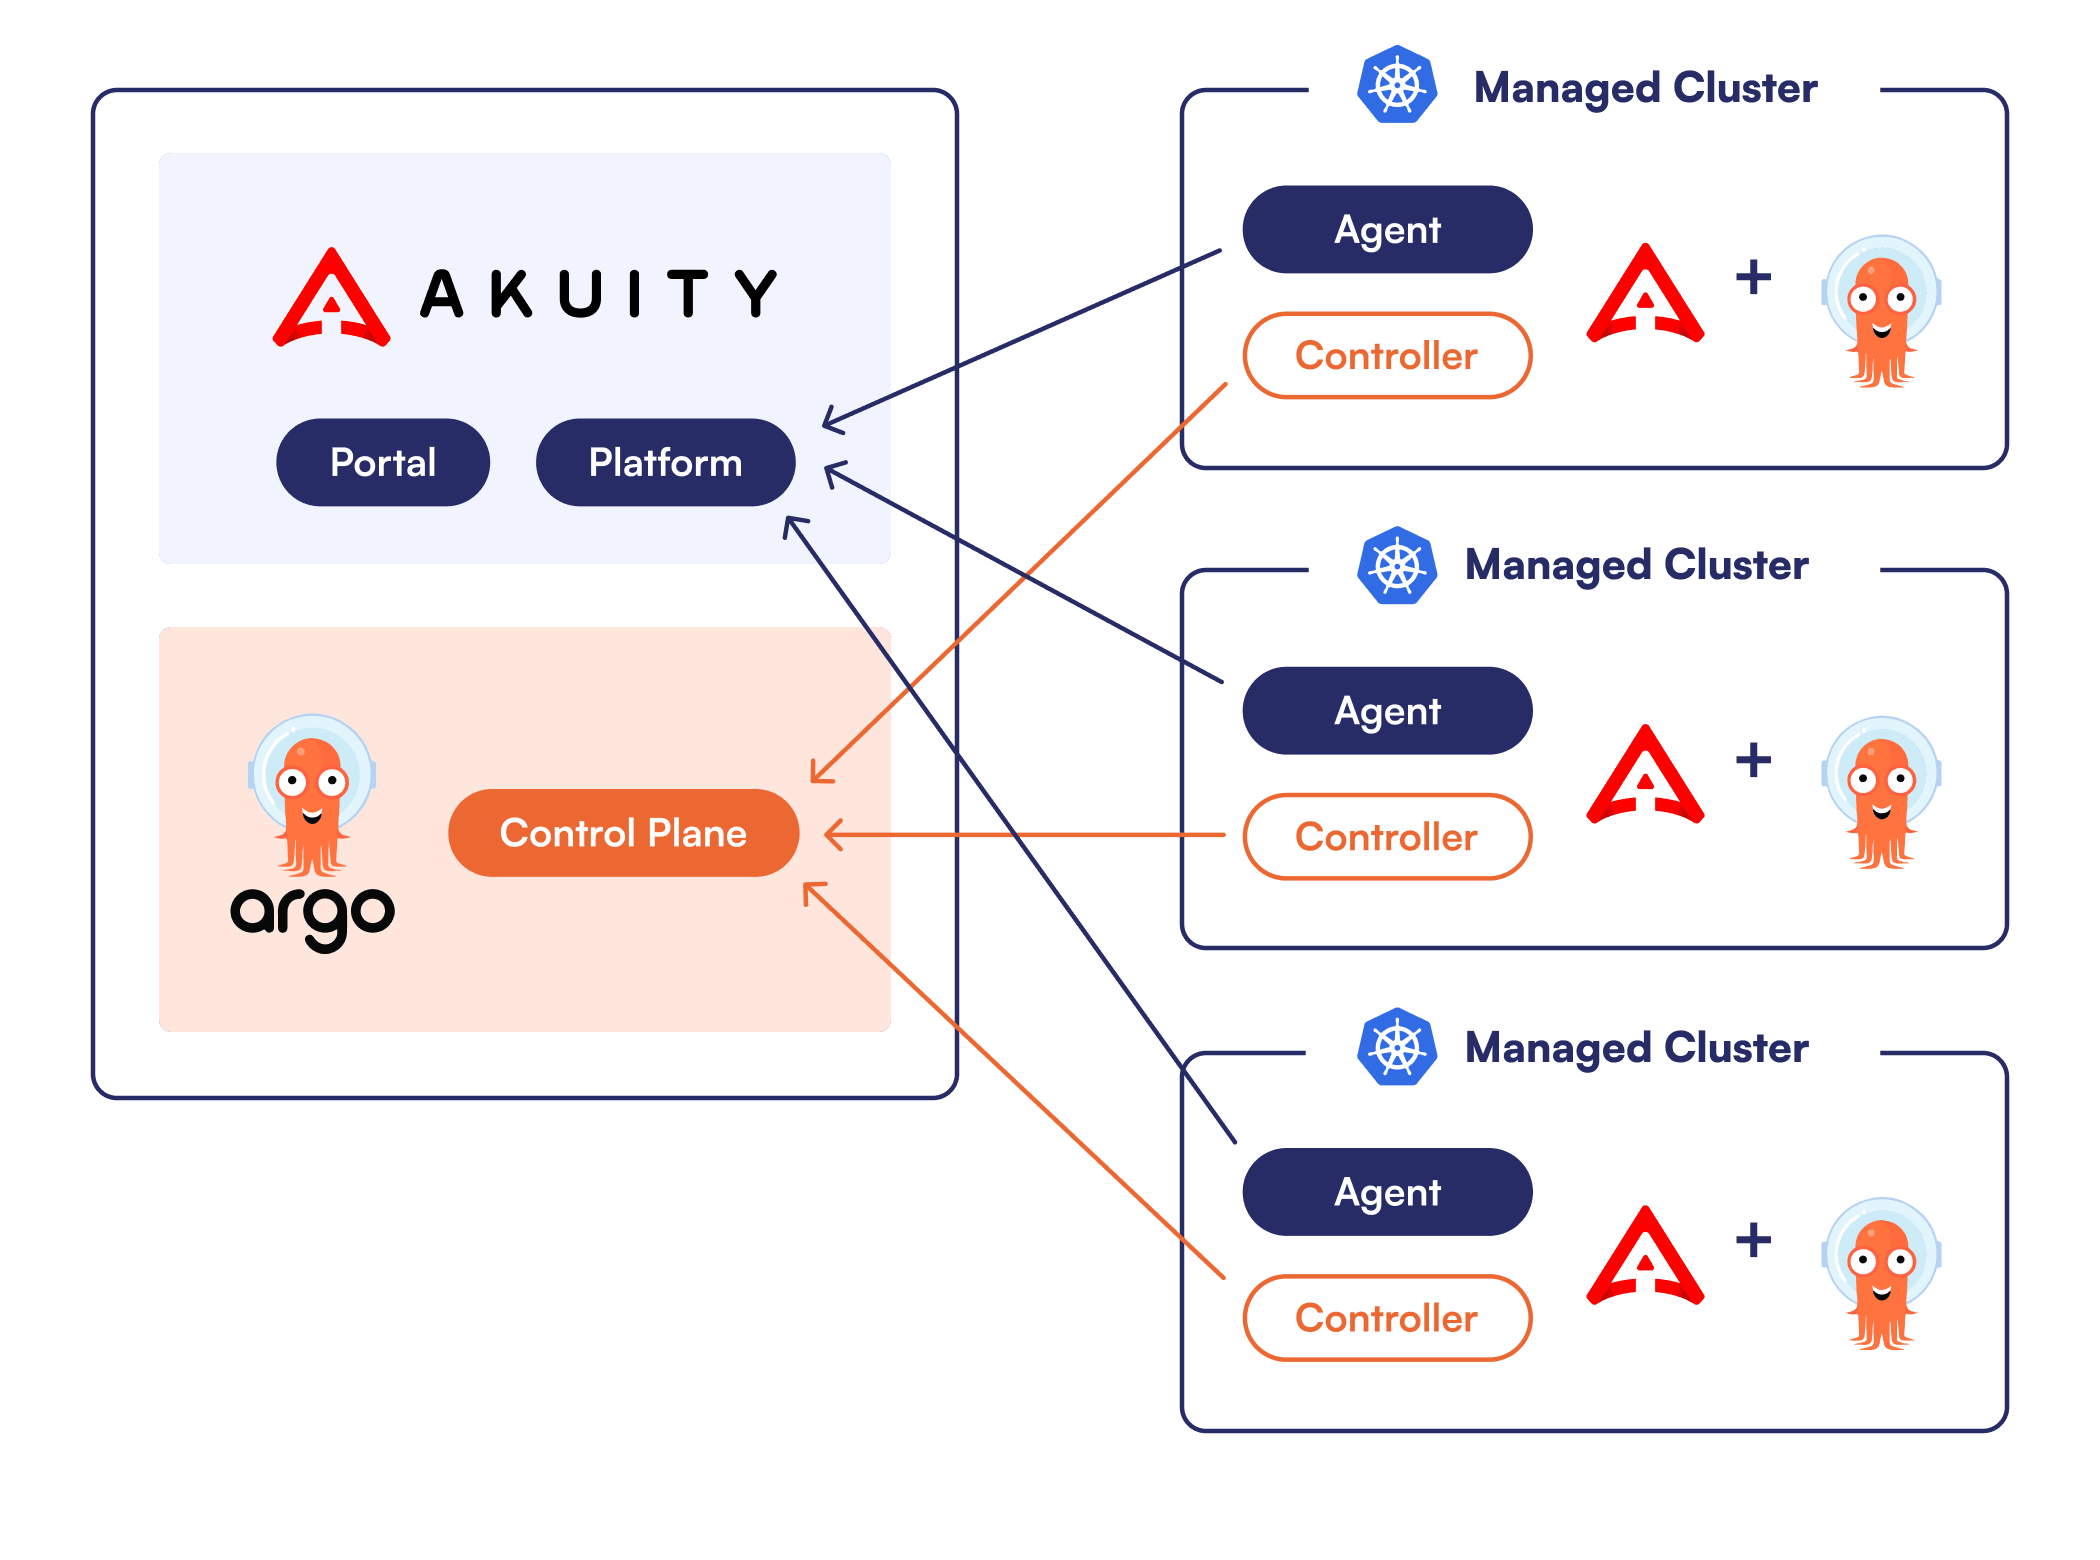 agent based architecture of akuity